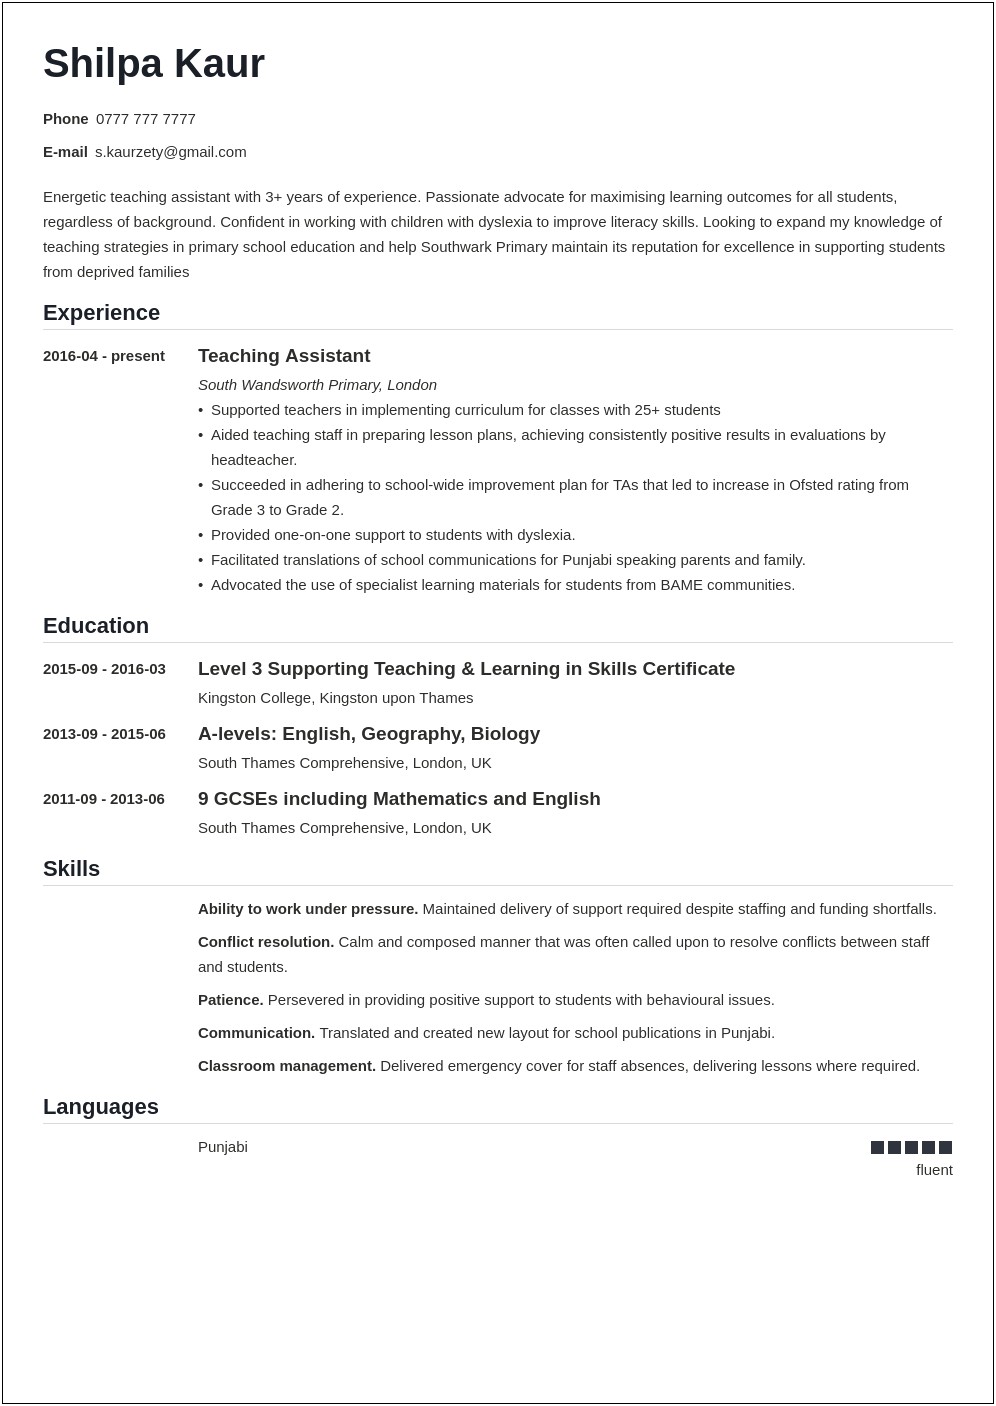 Example Of A Teacher Assistant Resume